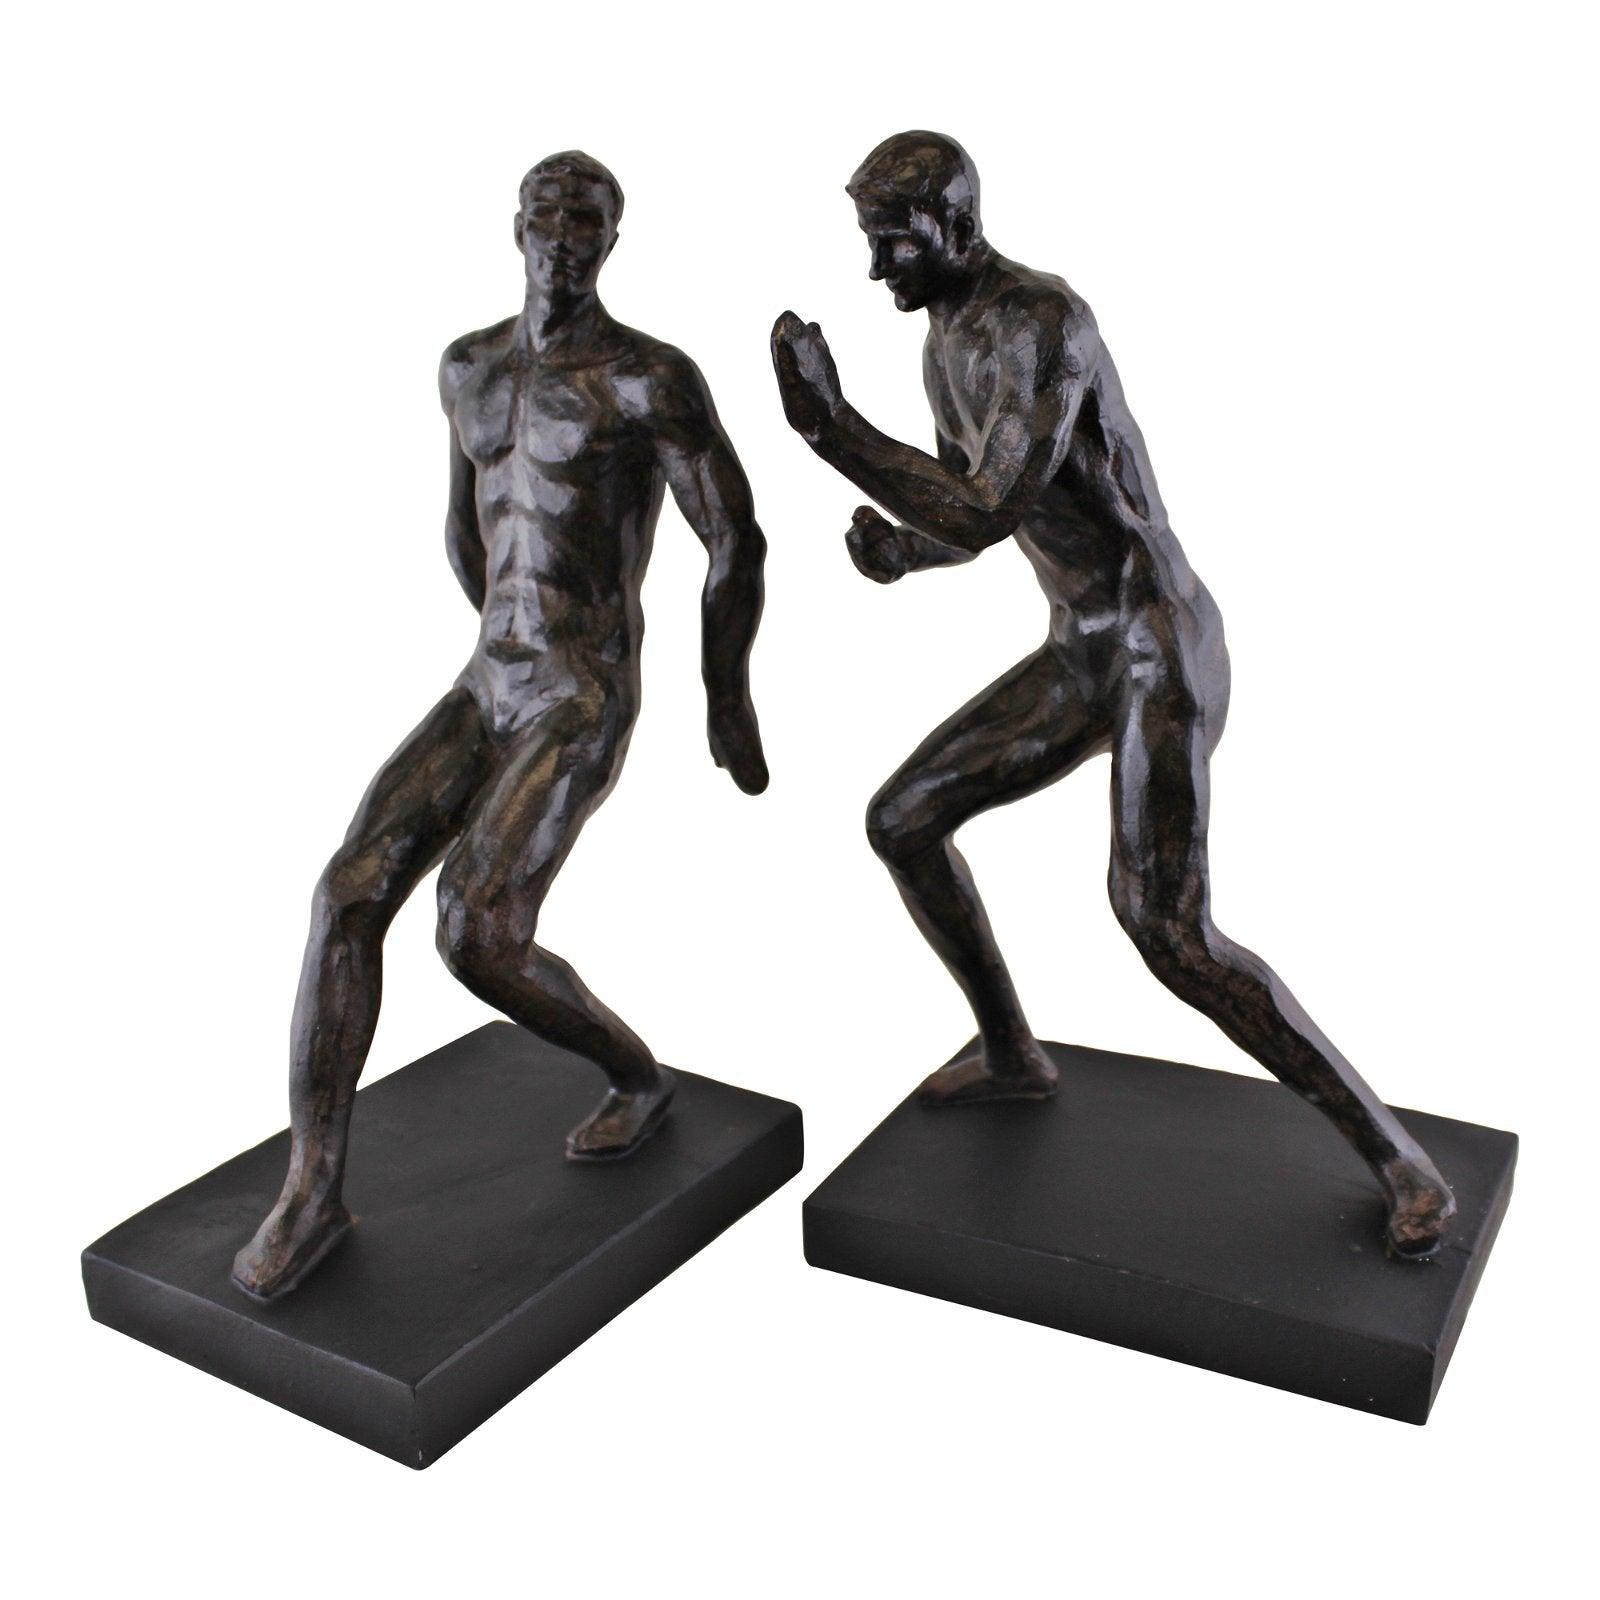 View Male Statue Bookends information